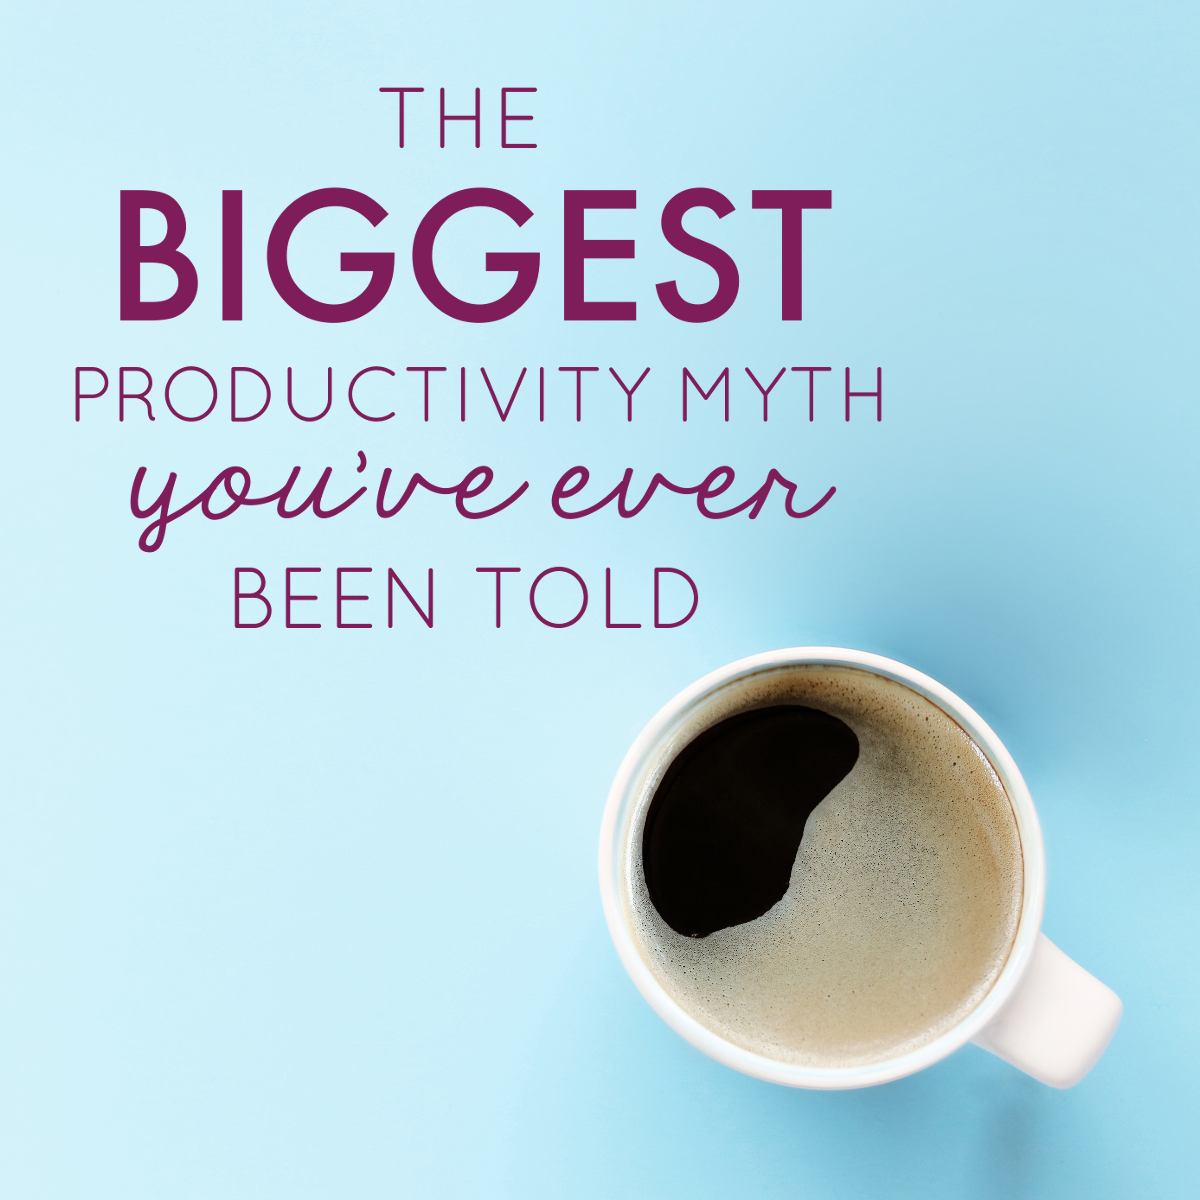 The Biggest Productivity Myth You’ve Ever Been Told